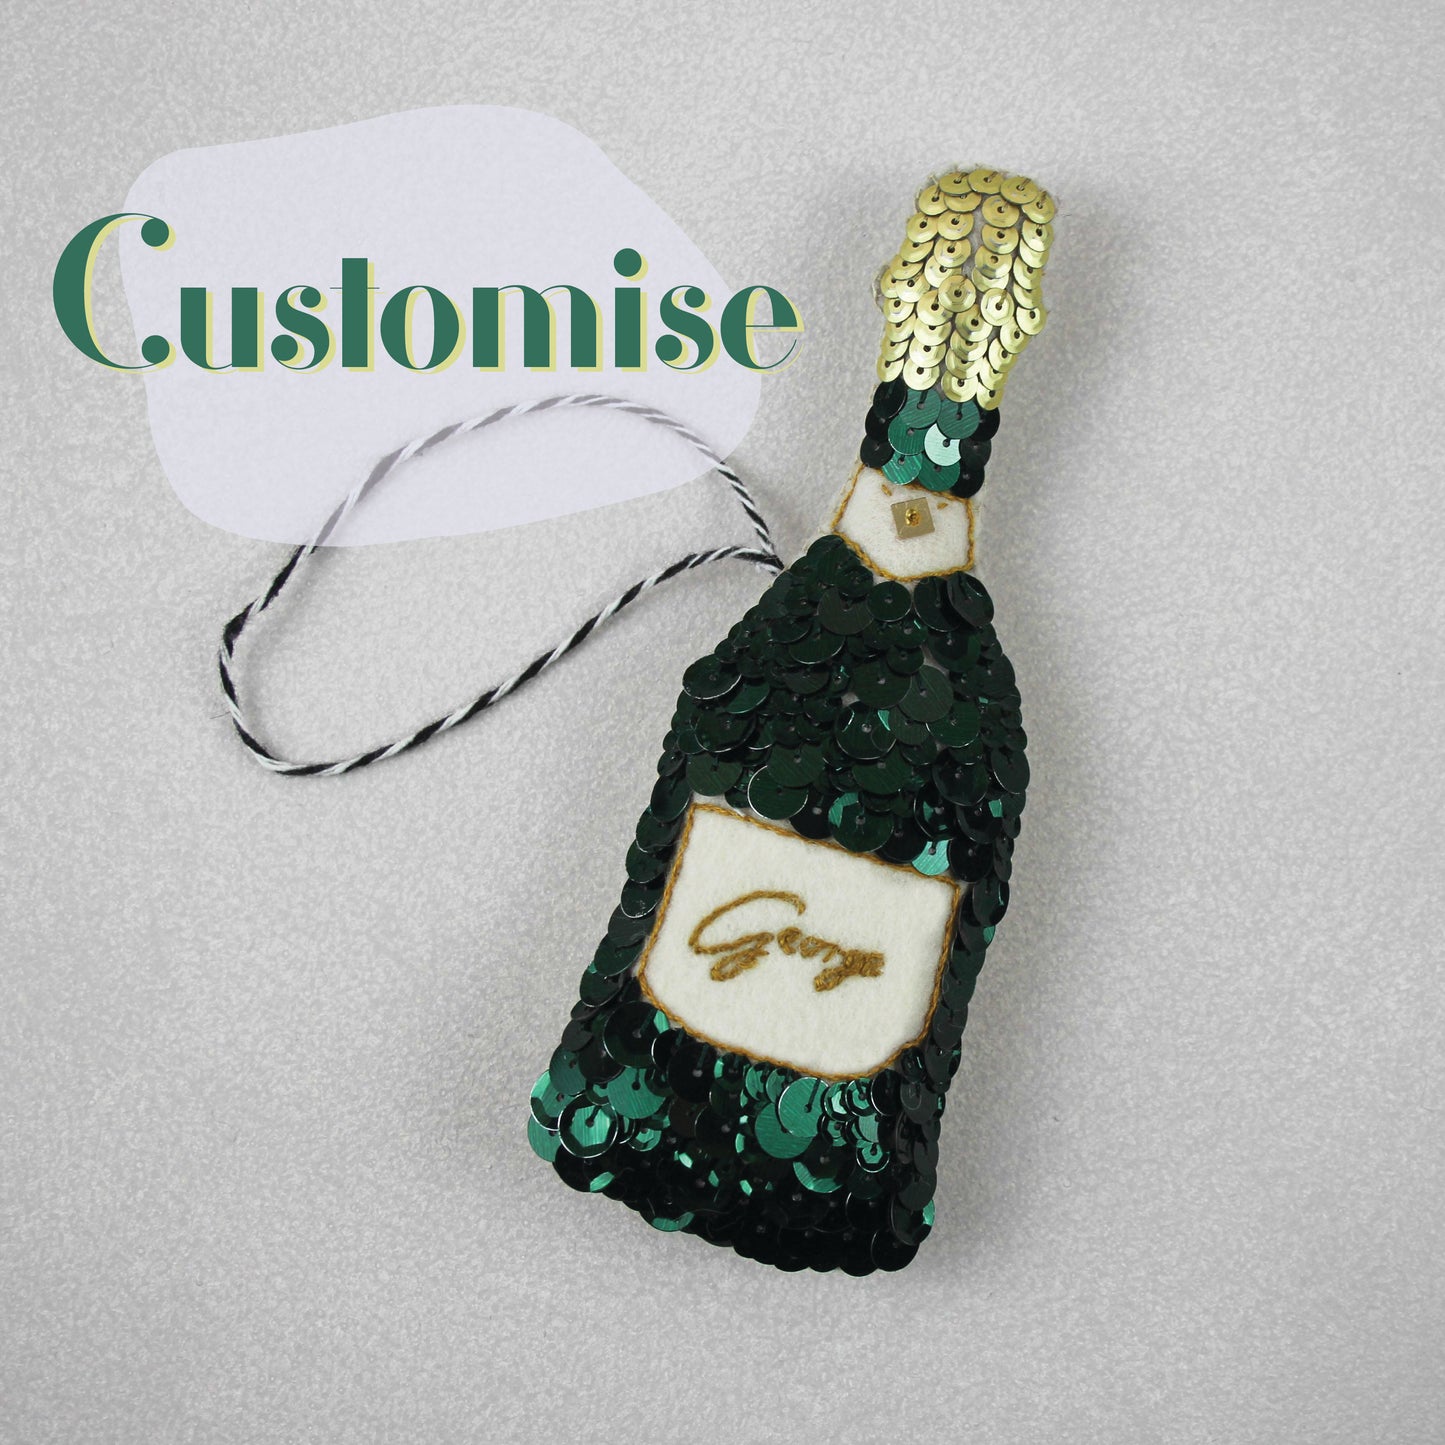 A green sequinned champagne bottle with the name George on the label. In the corner there is a sign saying Customise